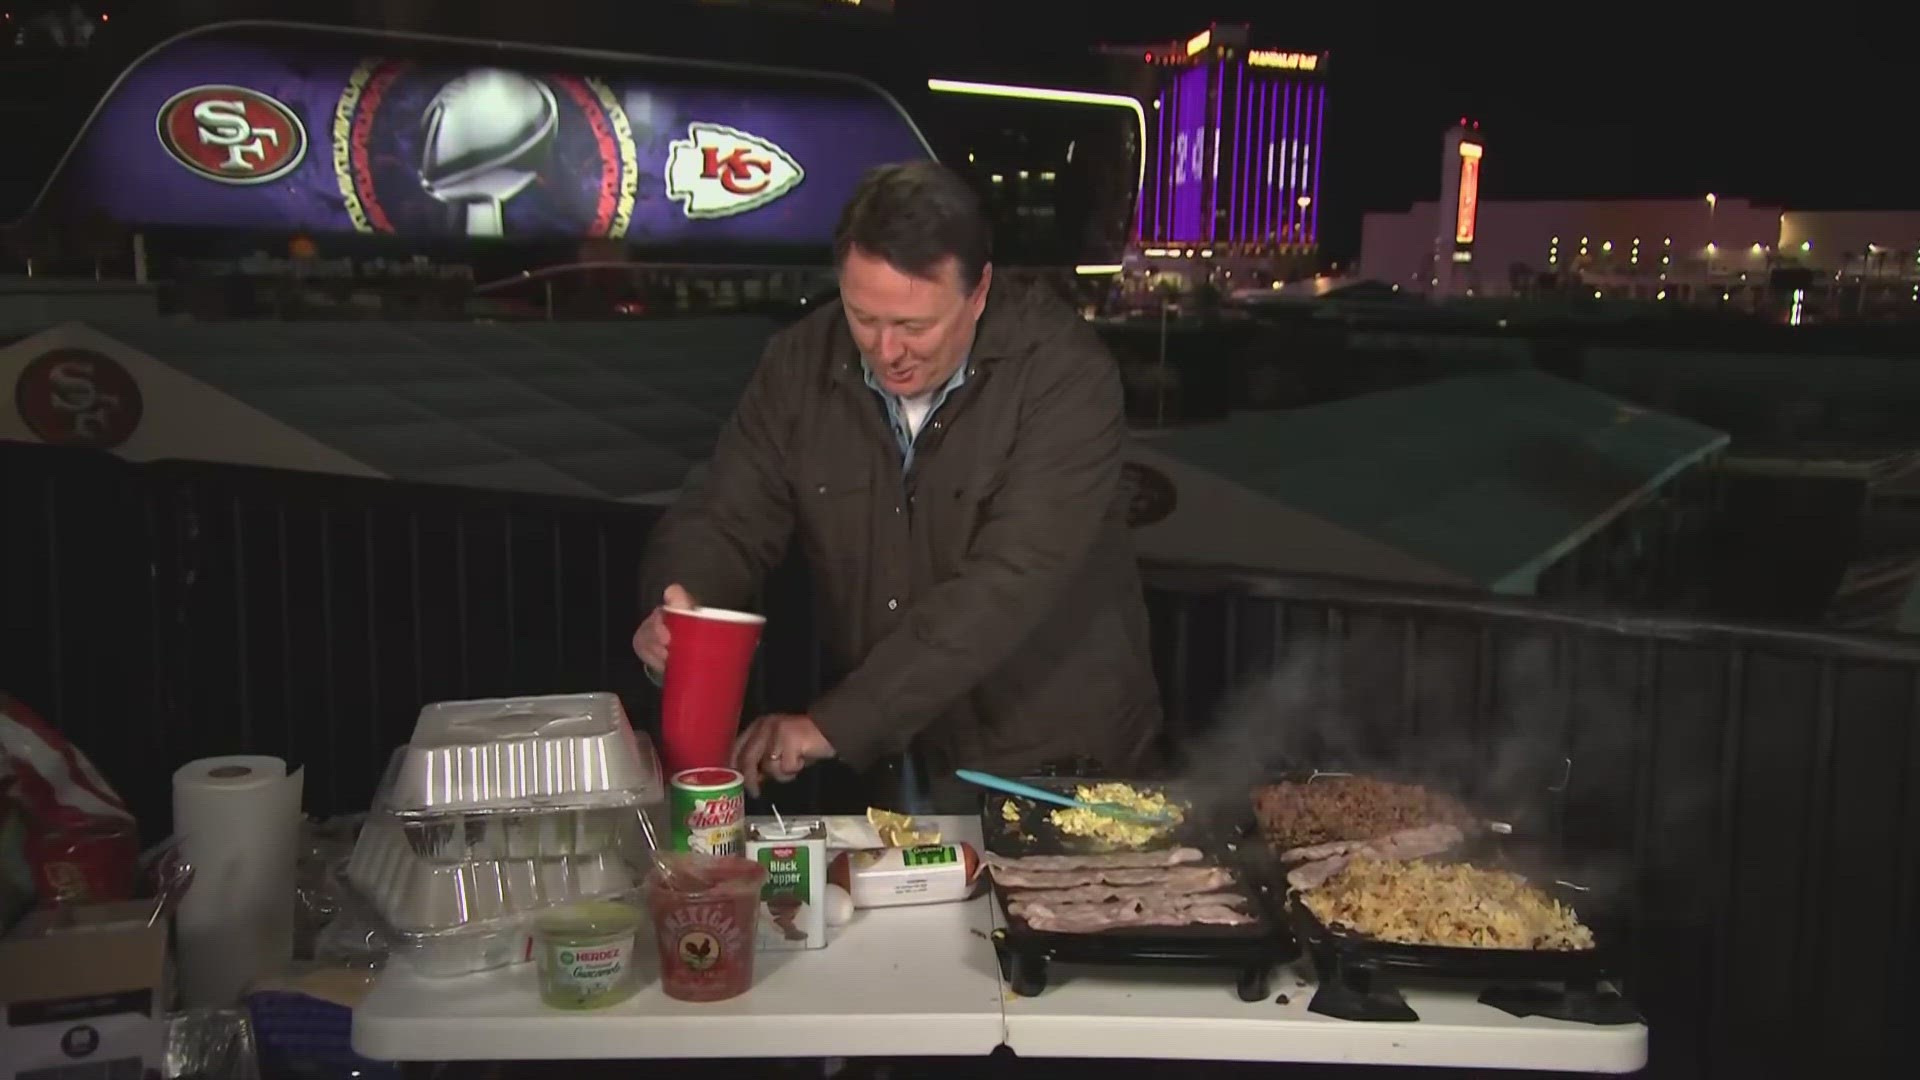 NBC's Jay Gray is cooking up some tailgate snacks ahead of Super Bowl Sunday in Las Vegas.